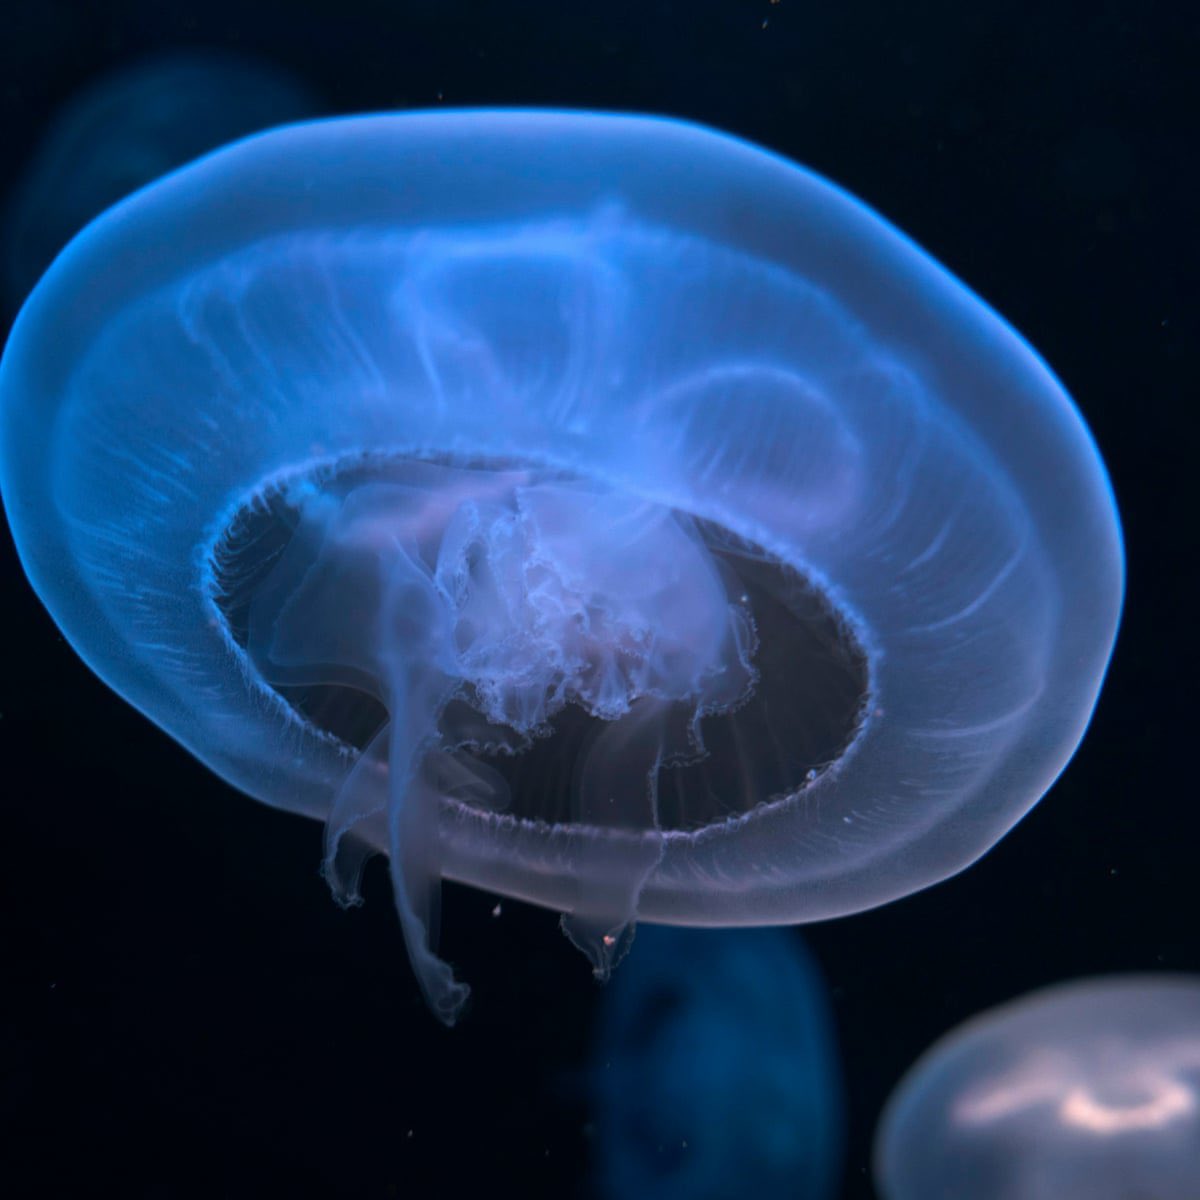 cute jellyfish thread because i love them!!!! it’s safe! /srs